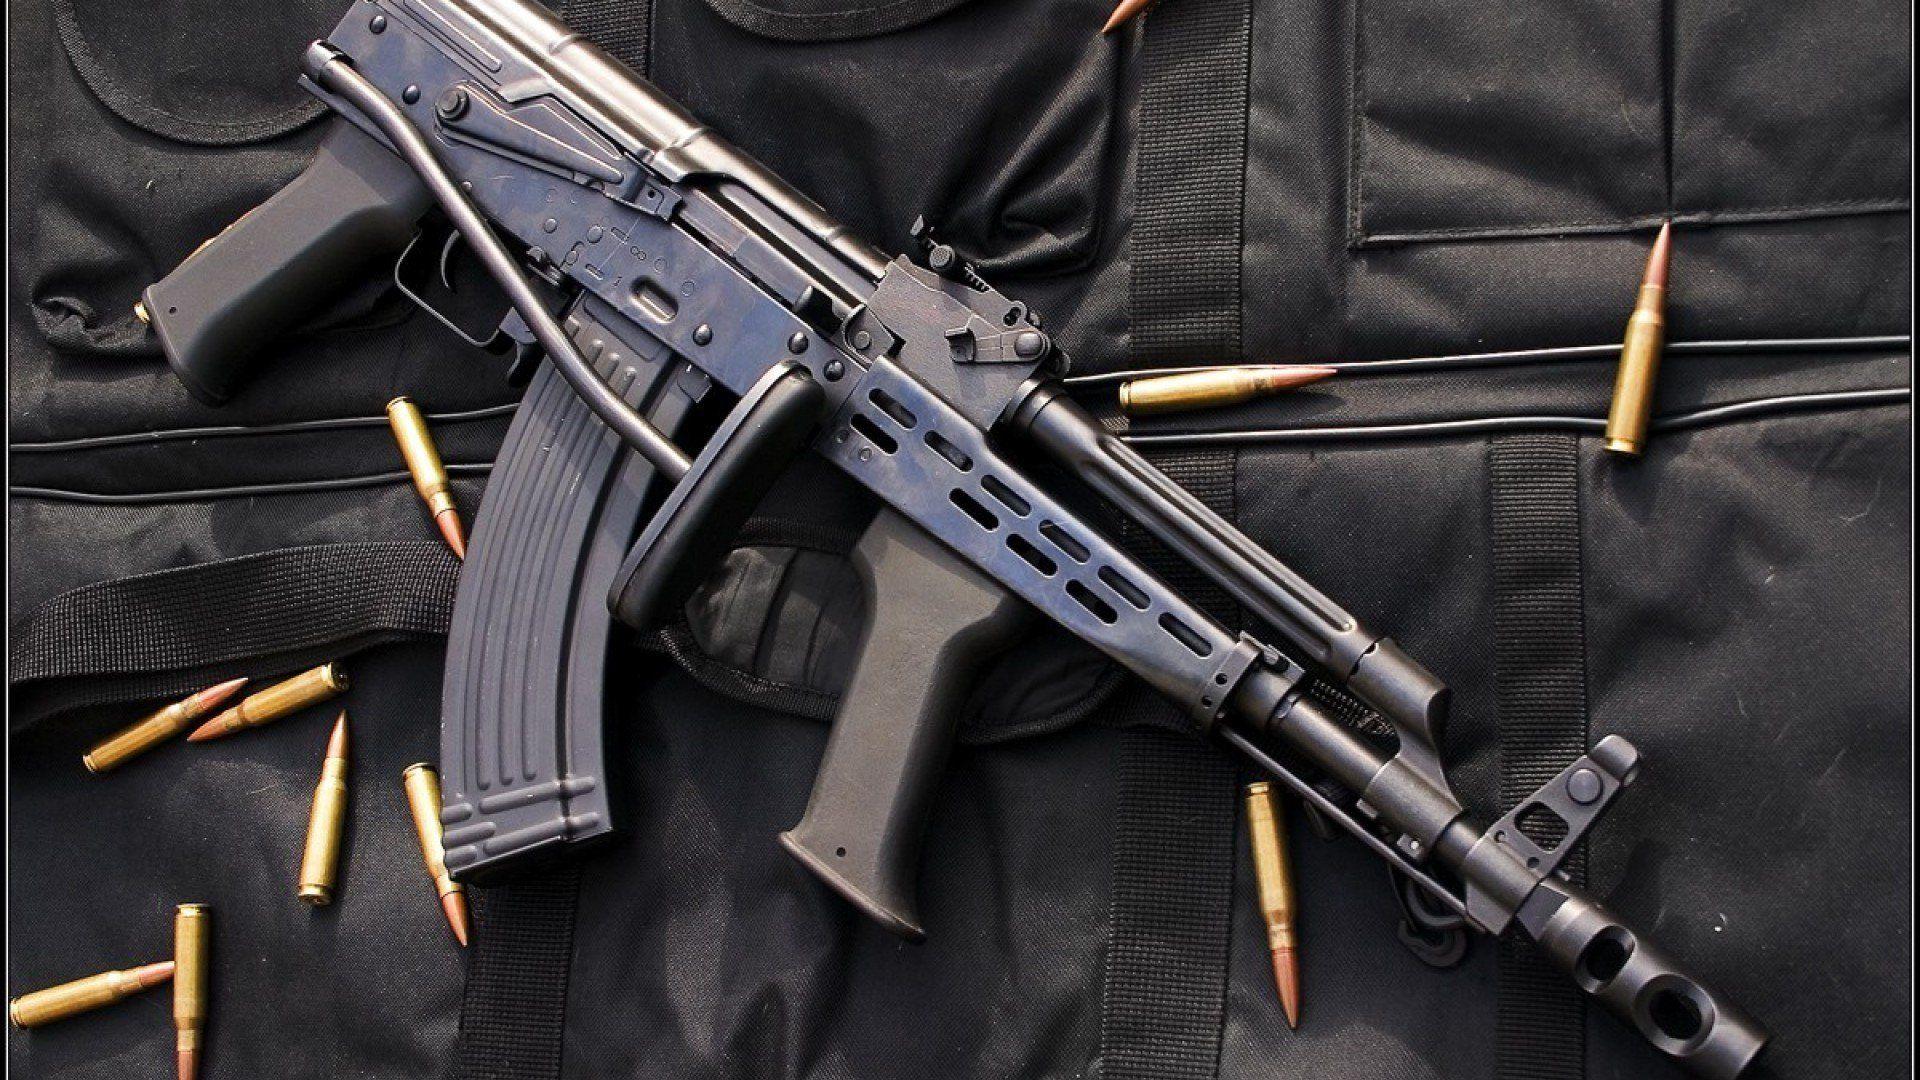 Download Ak 47 wallpapers for mobile phone free Ak 47 HD pictures